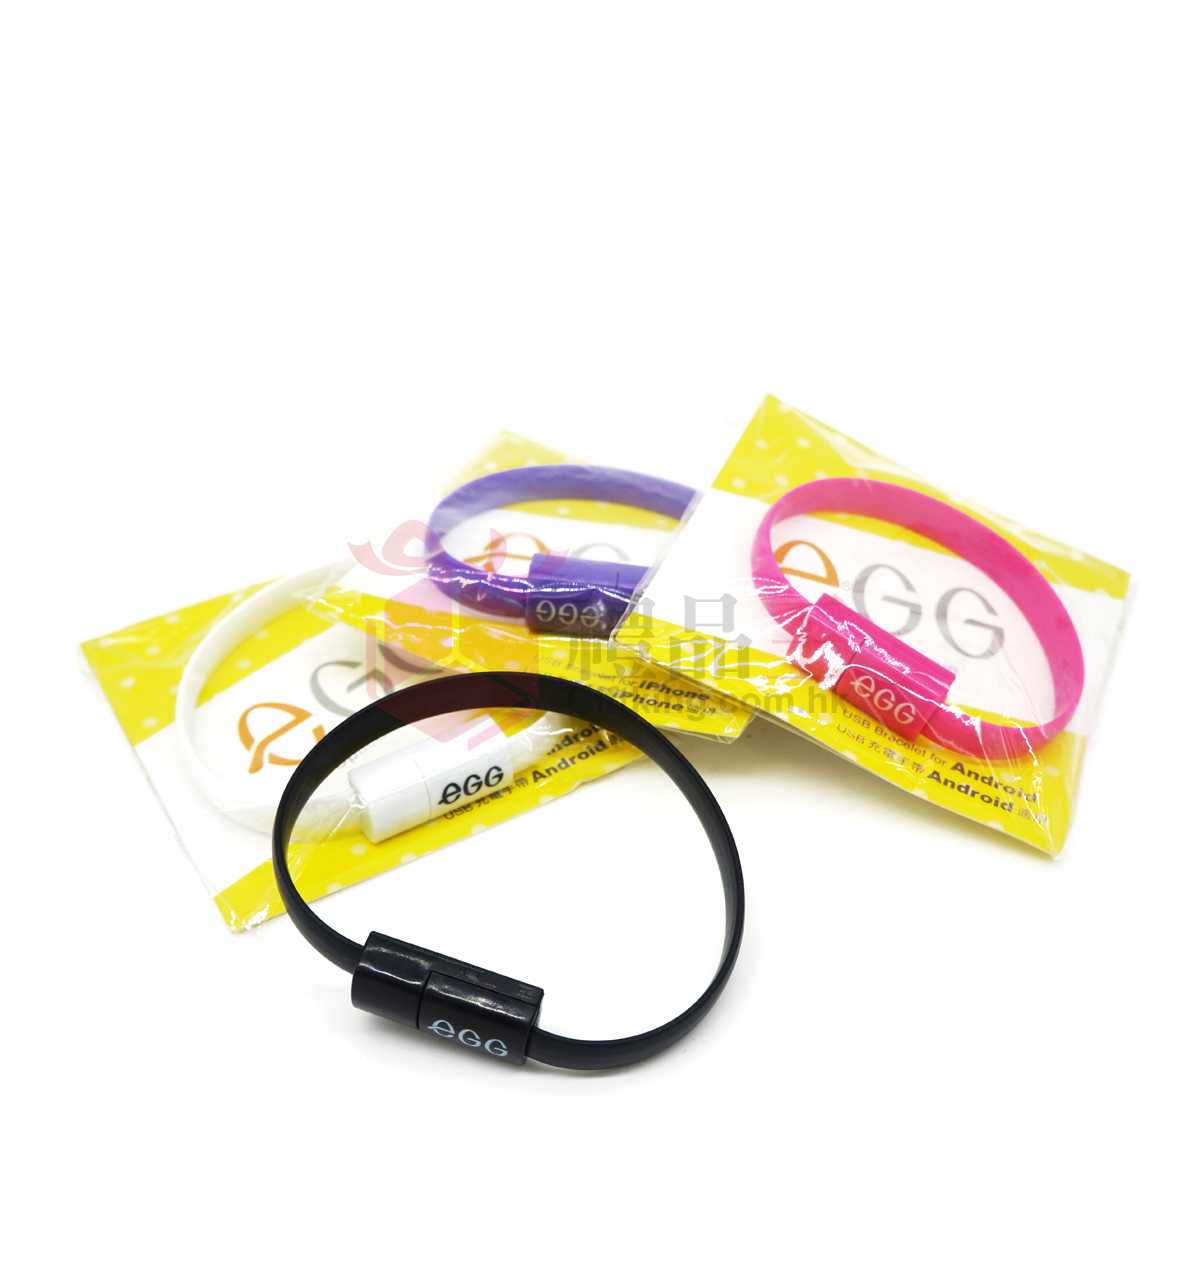 EGG Optical Boutique - USB Cable Wristband (Electronic gift)